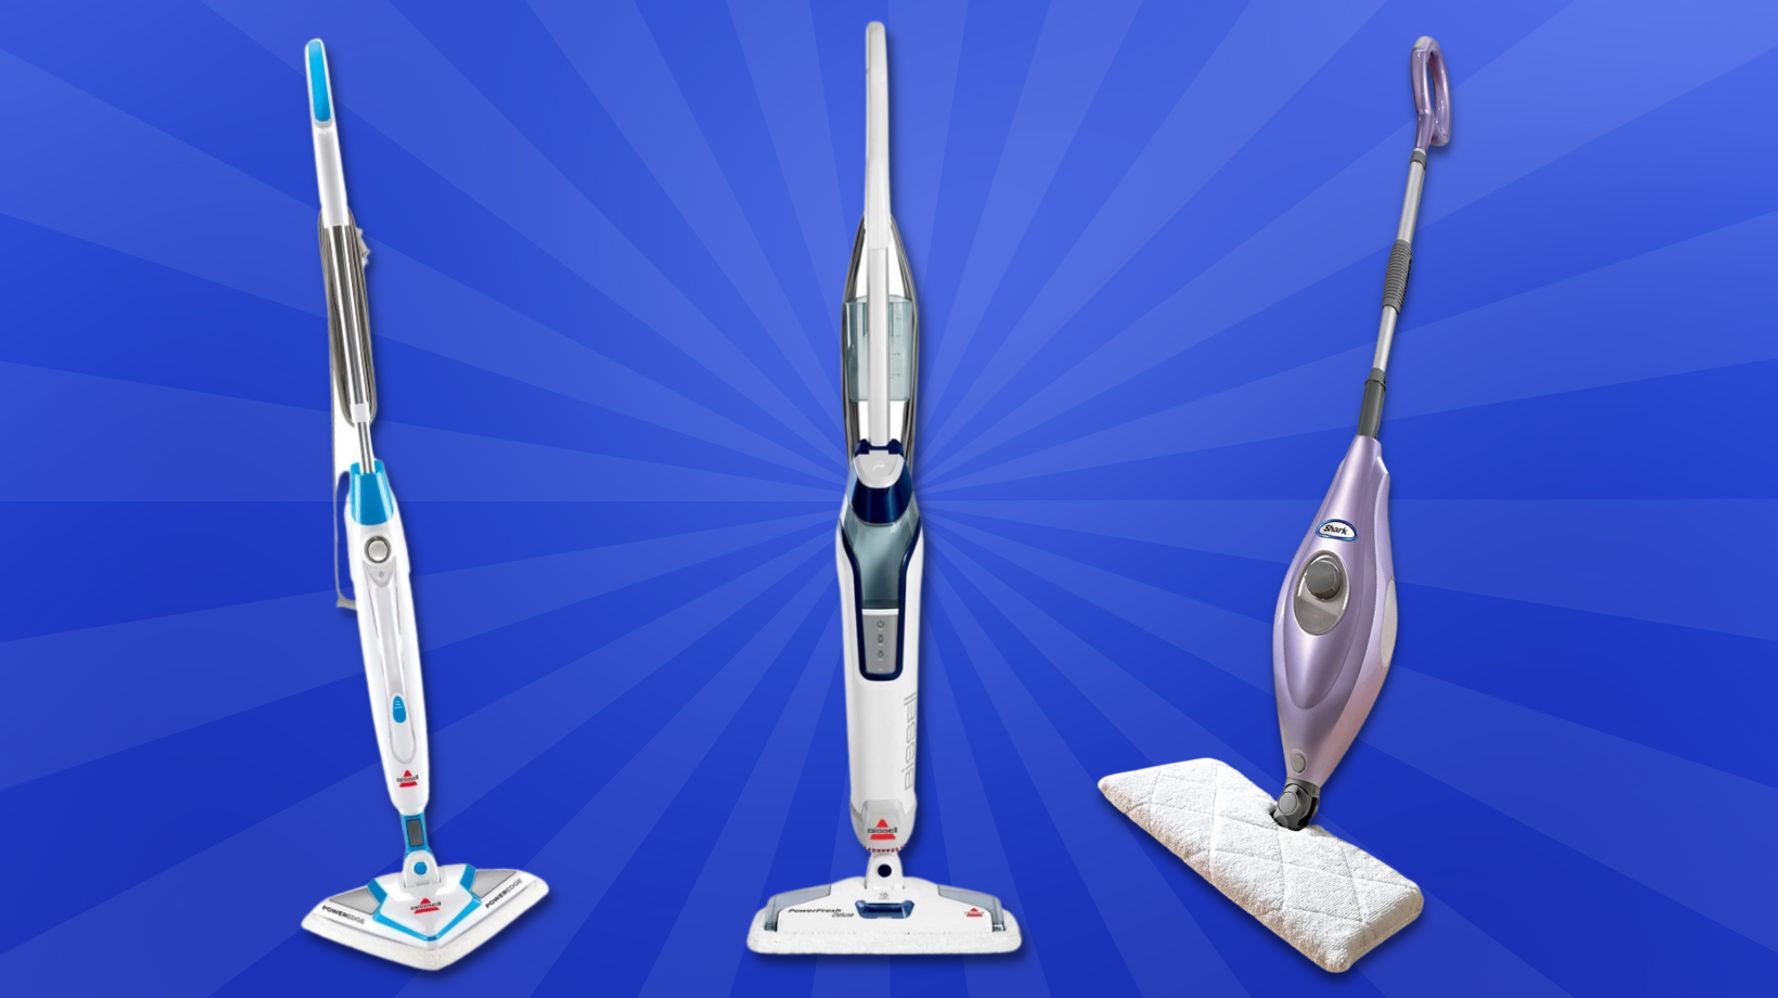 The Shark Steam Mop I Swear By for Pets Is on Sale on